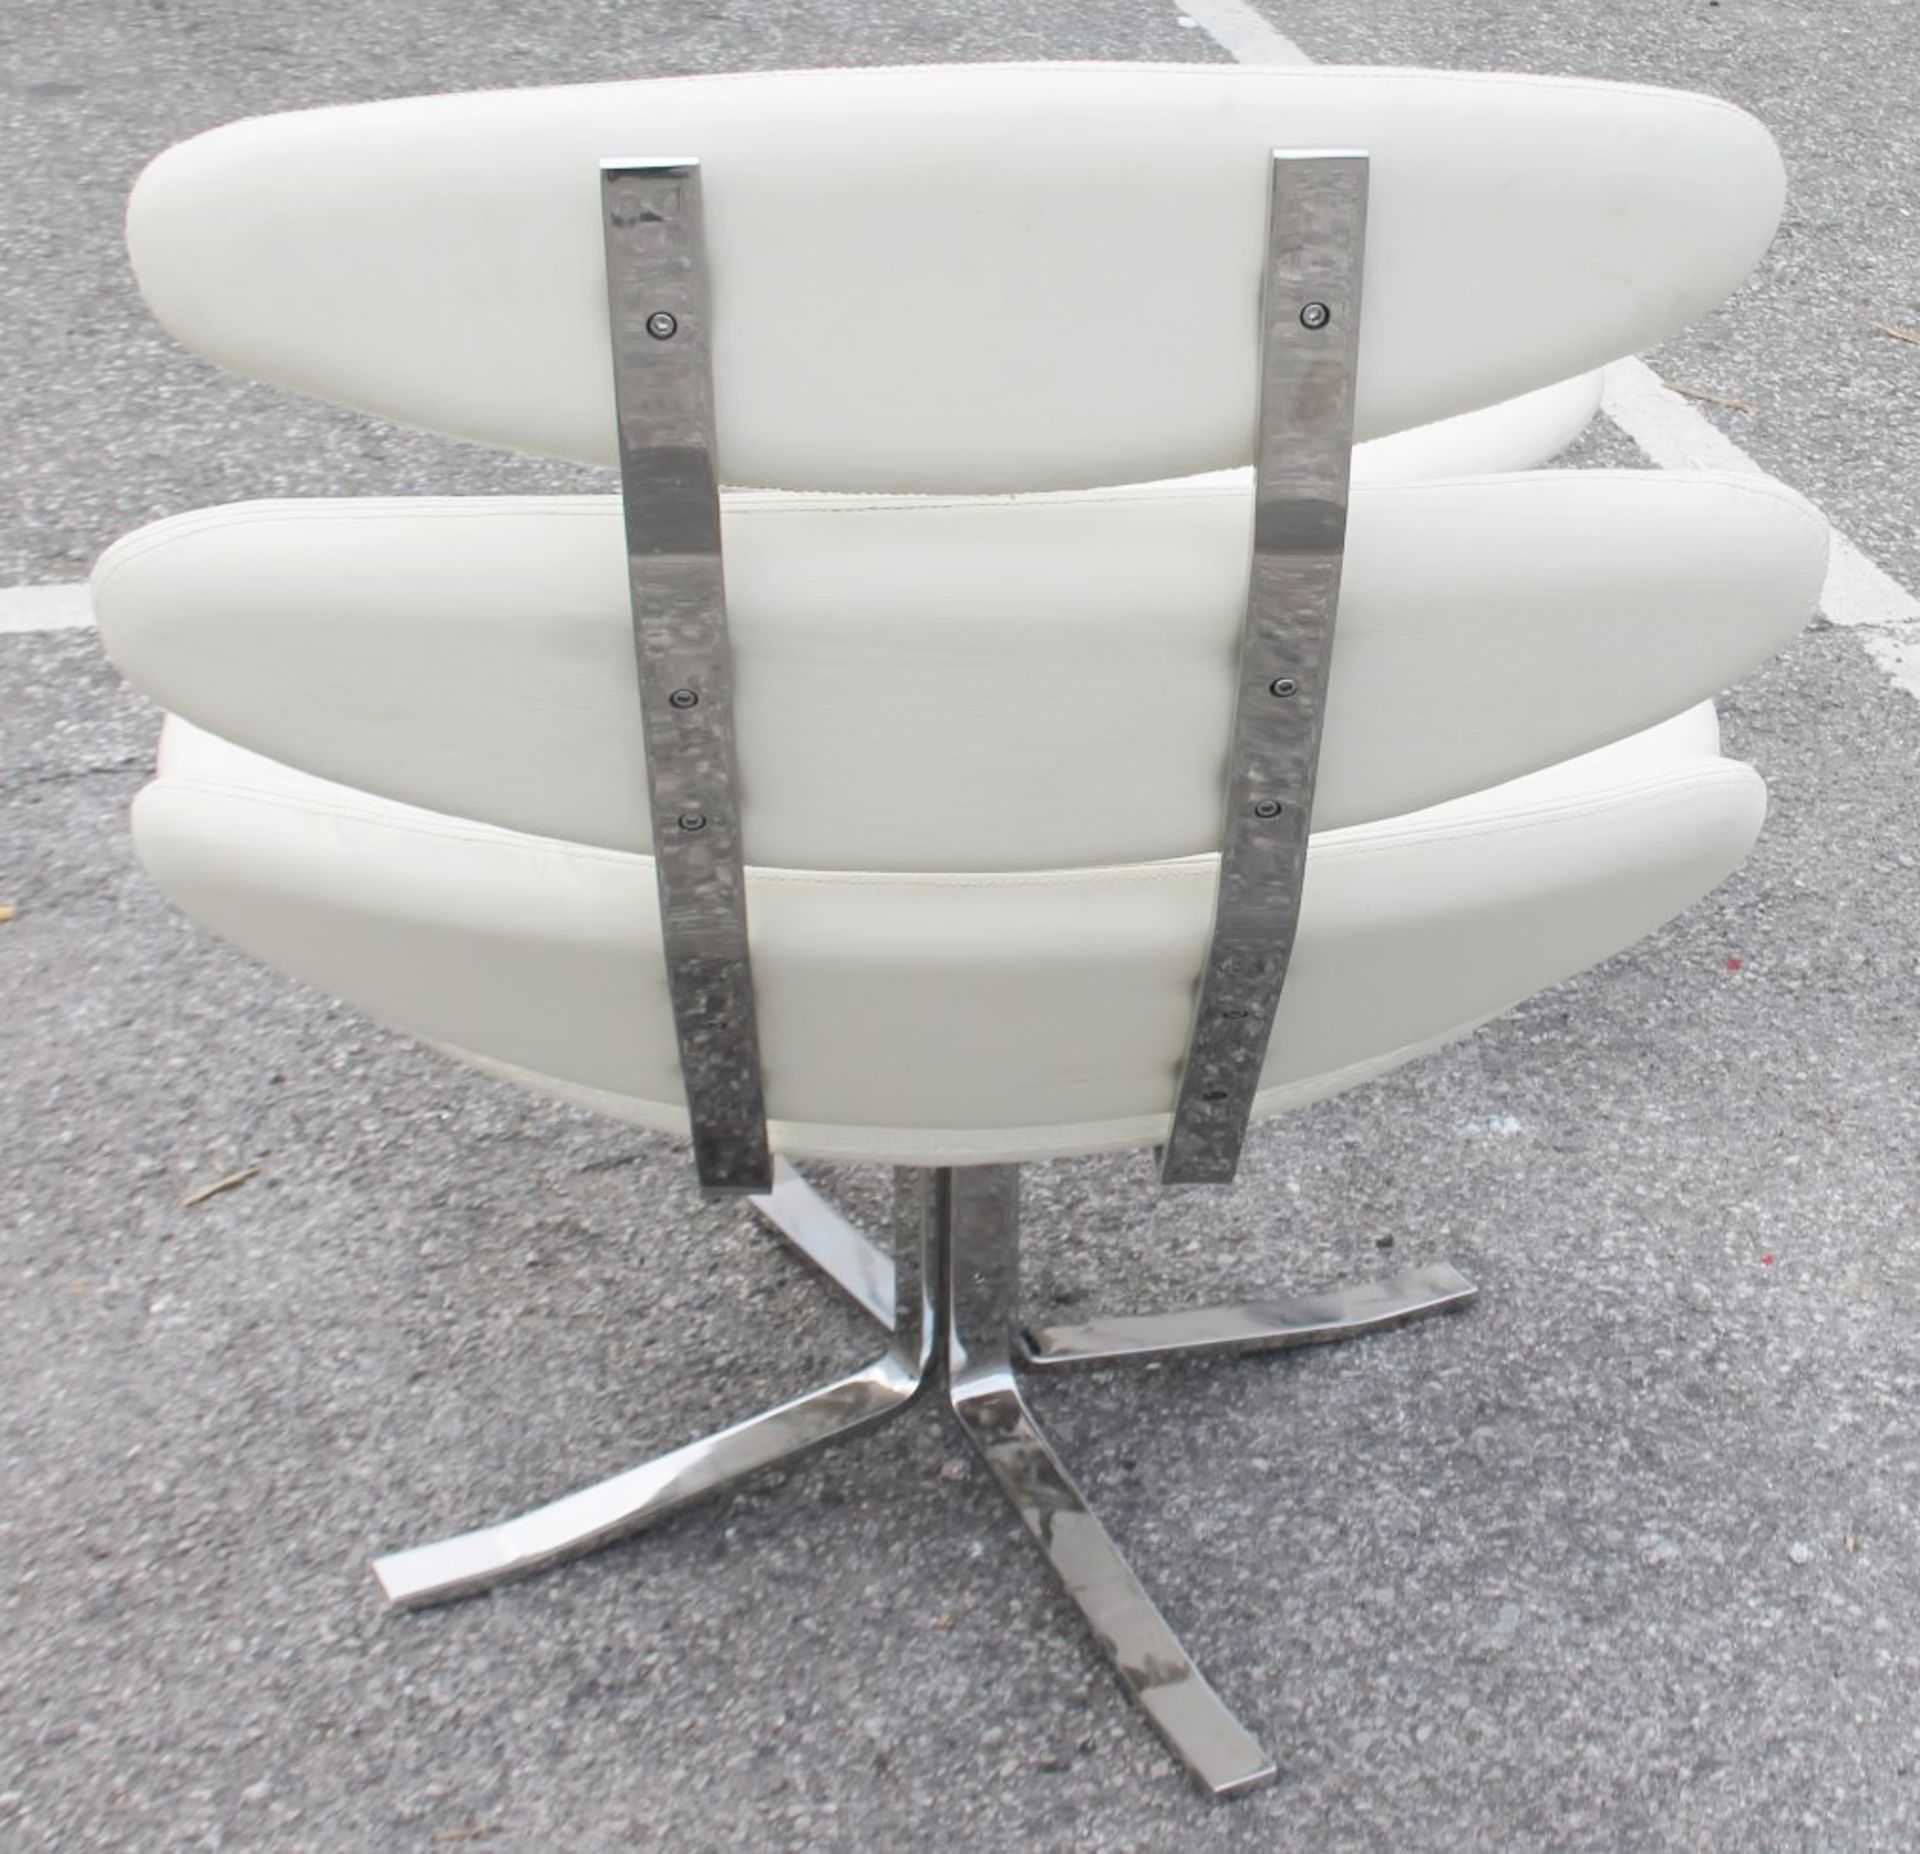 1 x Retro-Inspired Lounge Chair And Stool, Upholstered In A Cream Faux Leather - Ex-display Item - Image 3 of 3